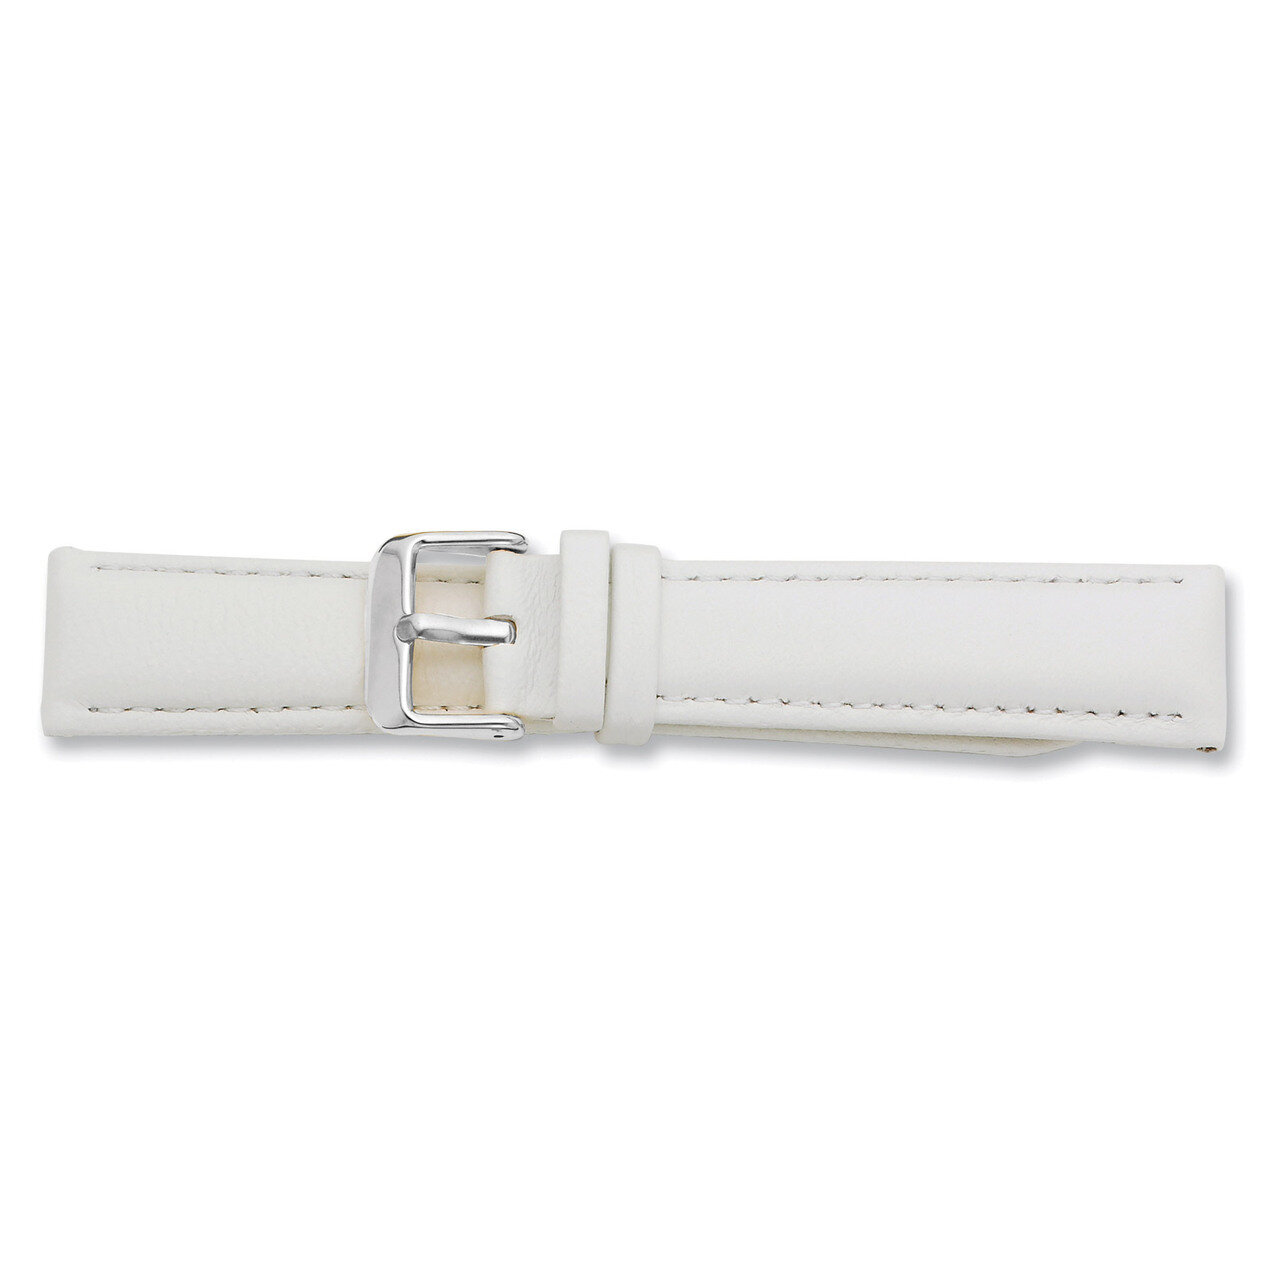 16mm White Glove Leather Watch Band 7.75 Inch Silver-tone Buckle BAW197-16